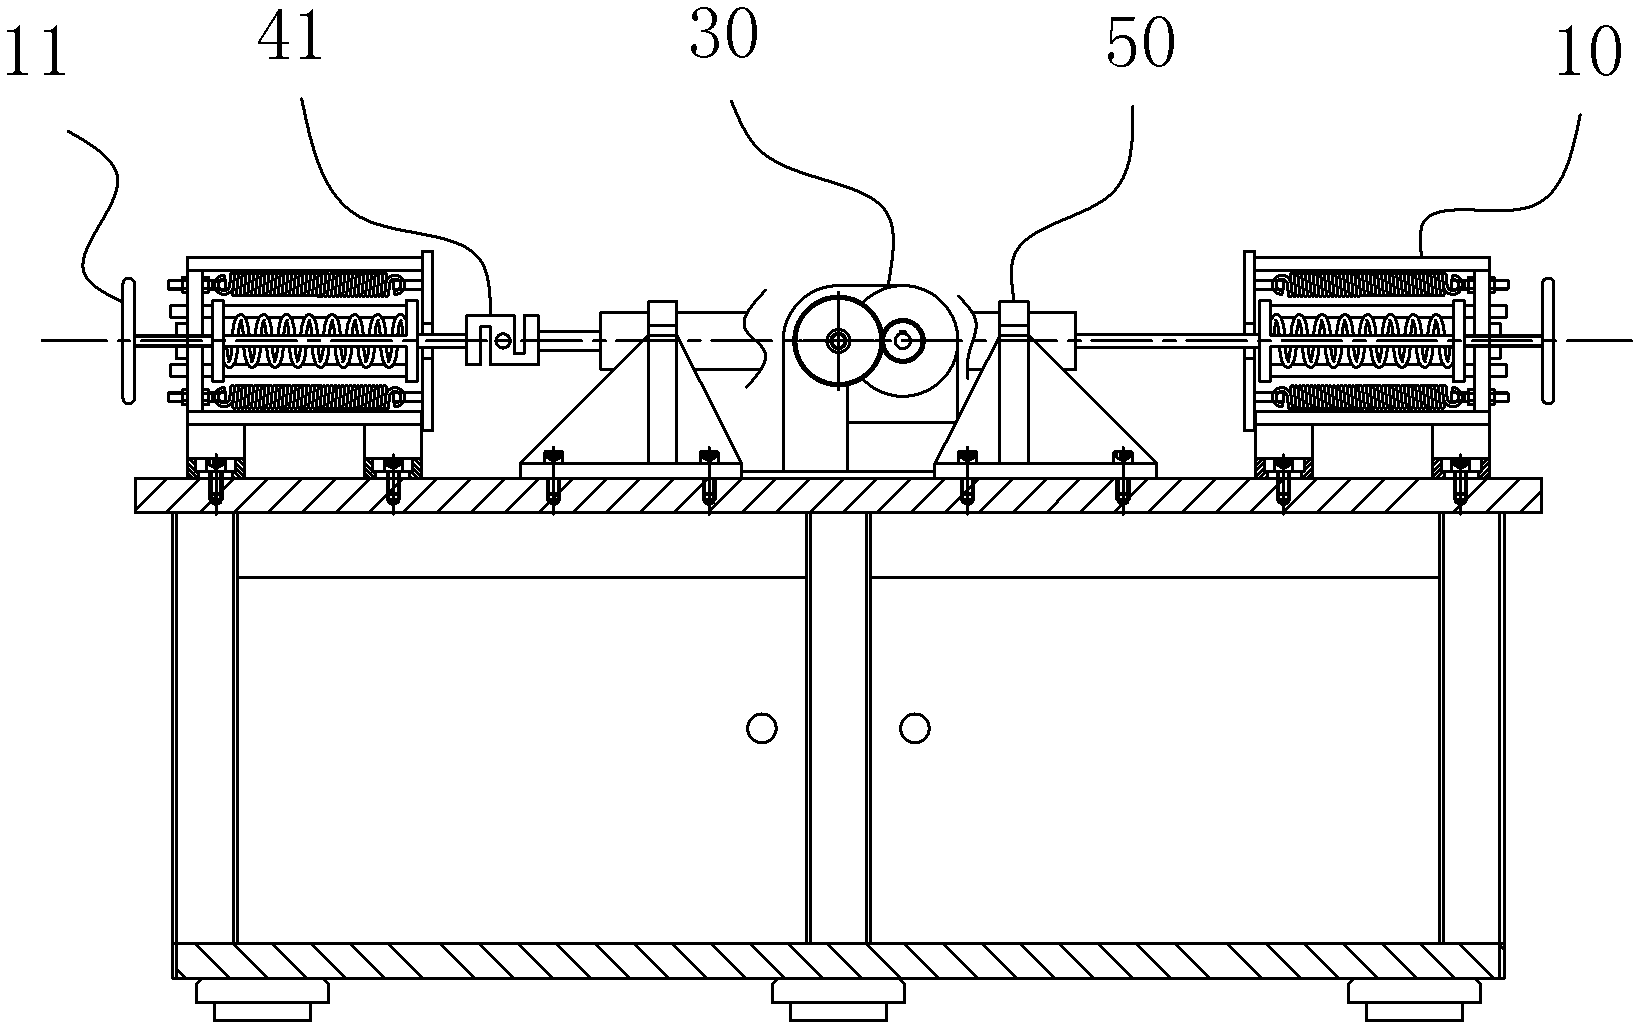 Platform frame for steering-by-wire experiments